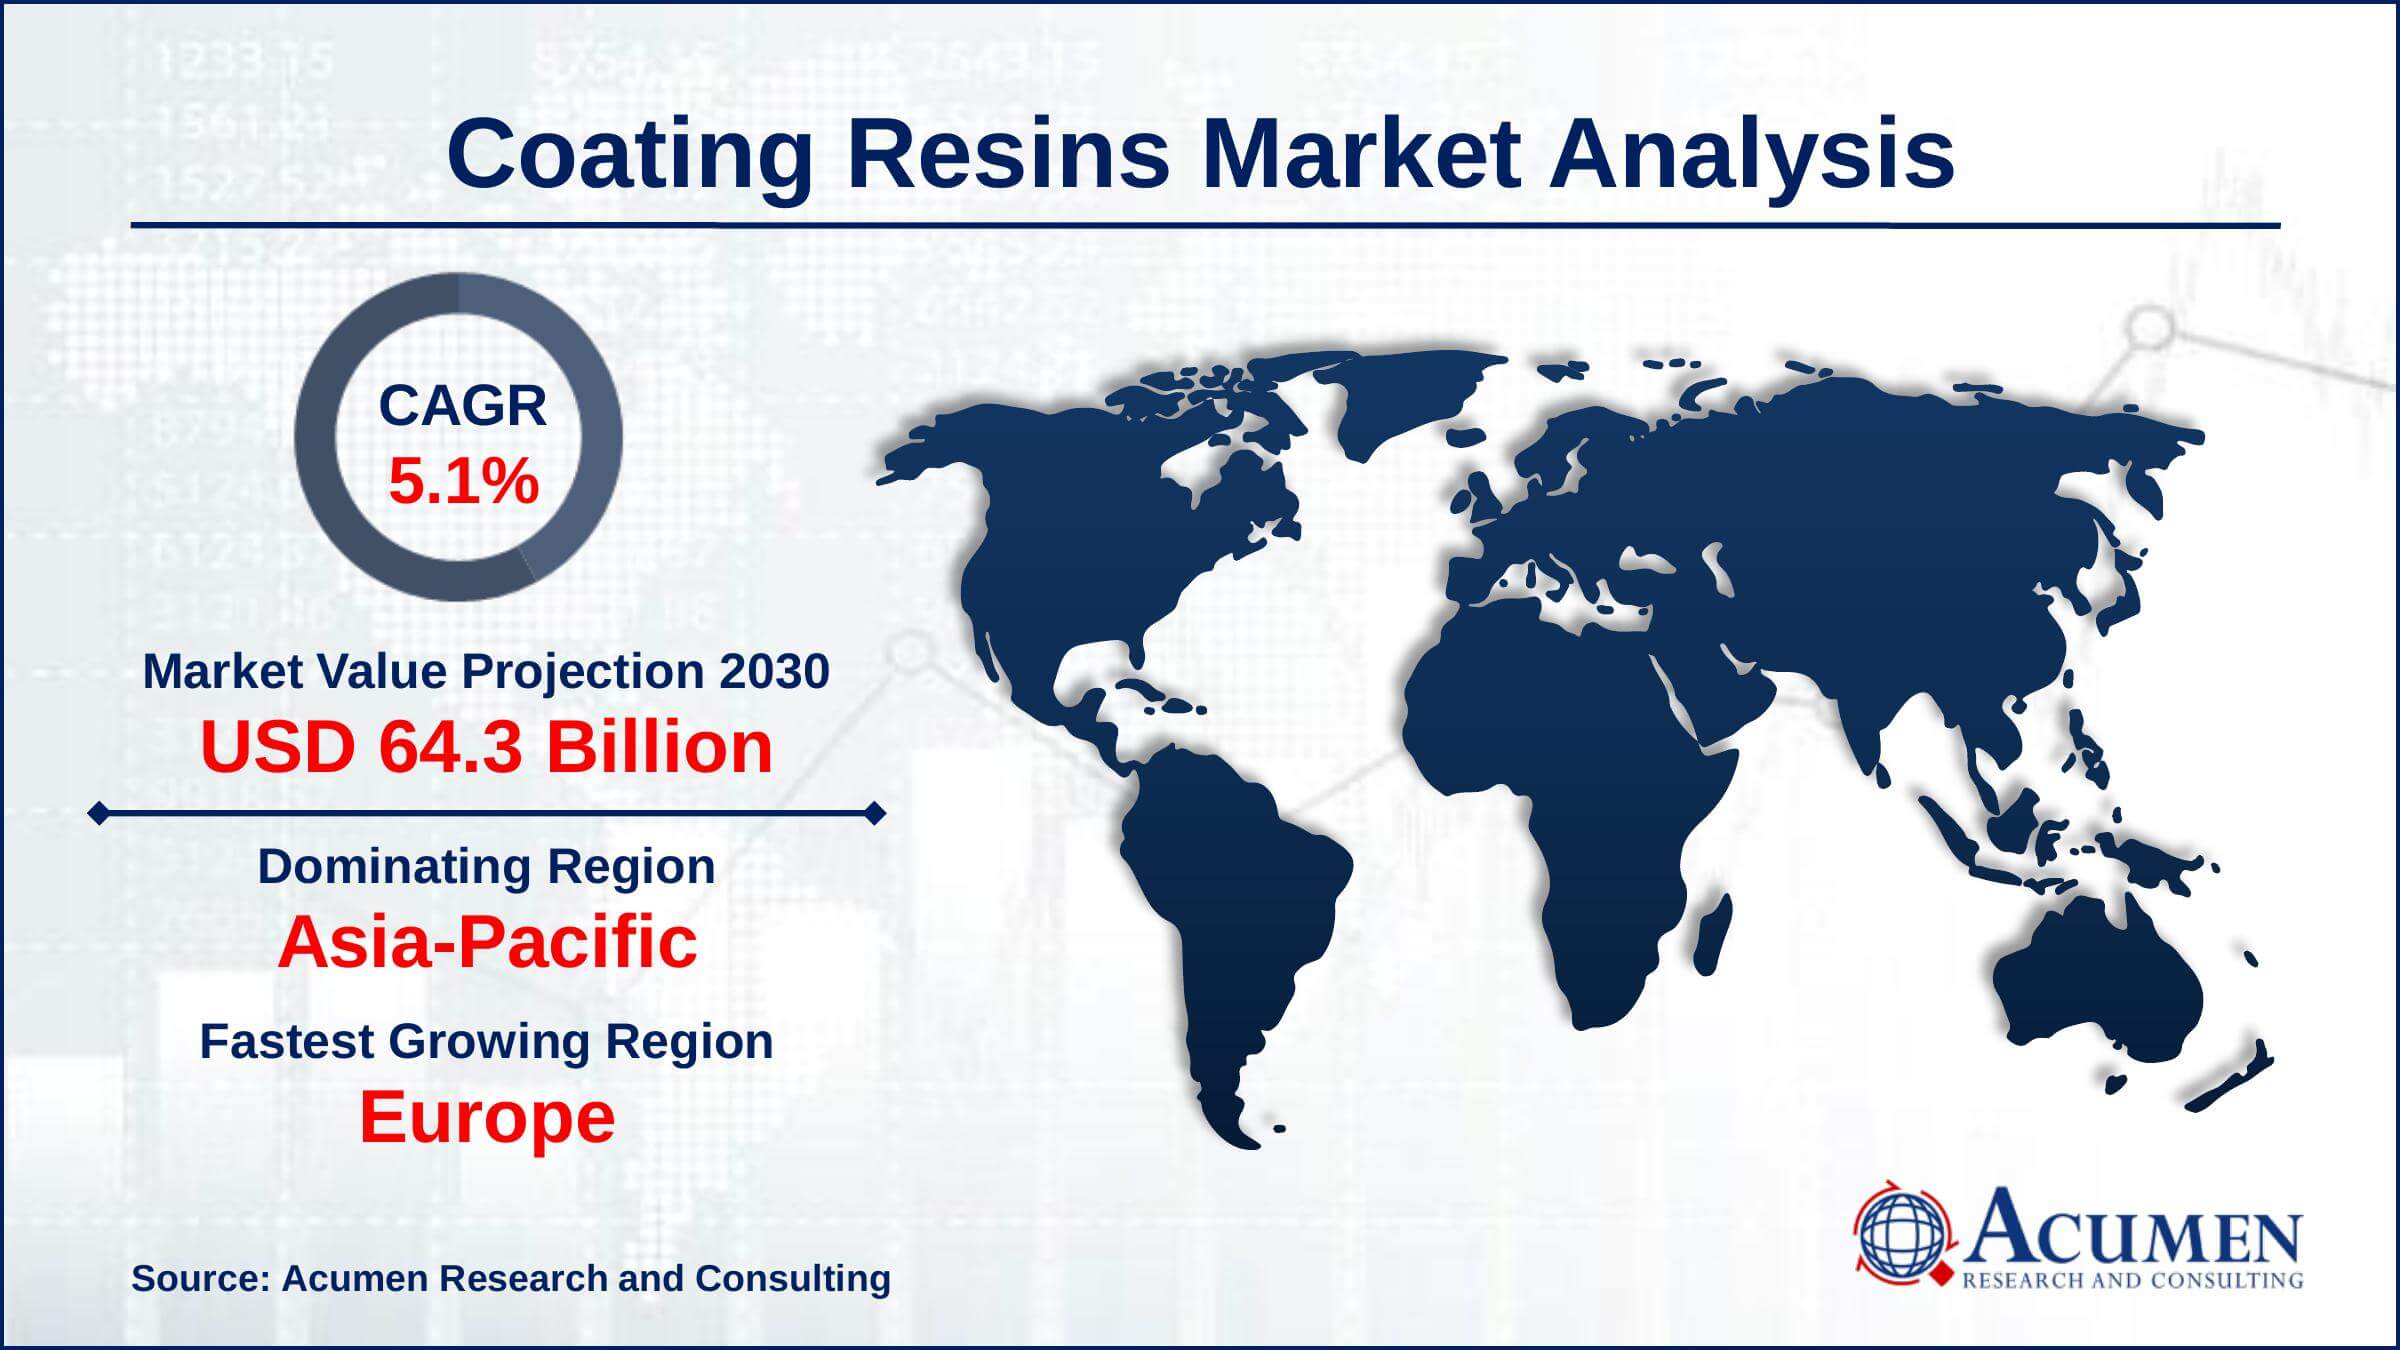 Global coating resins market revenue is expected to increase by USD 64.3 billion by 2030, with a 5.1% CAGR from 2022 to 2030